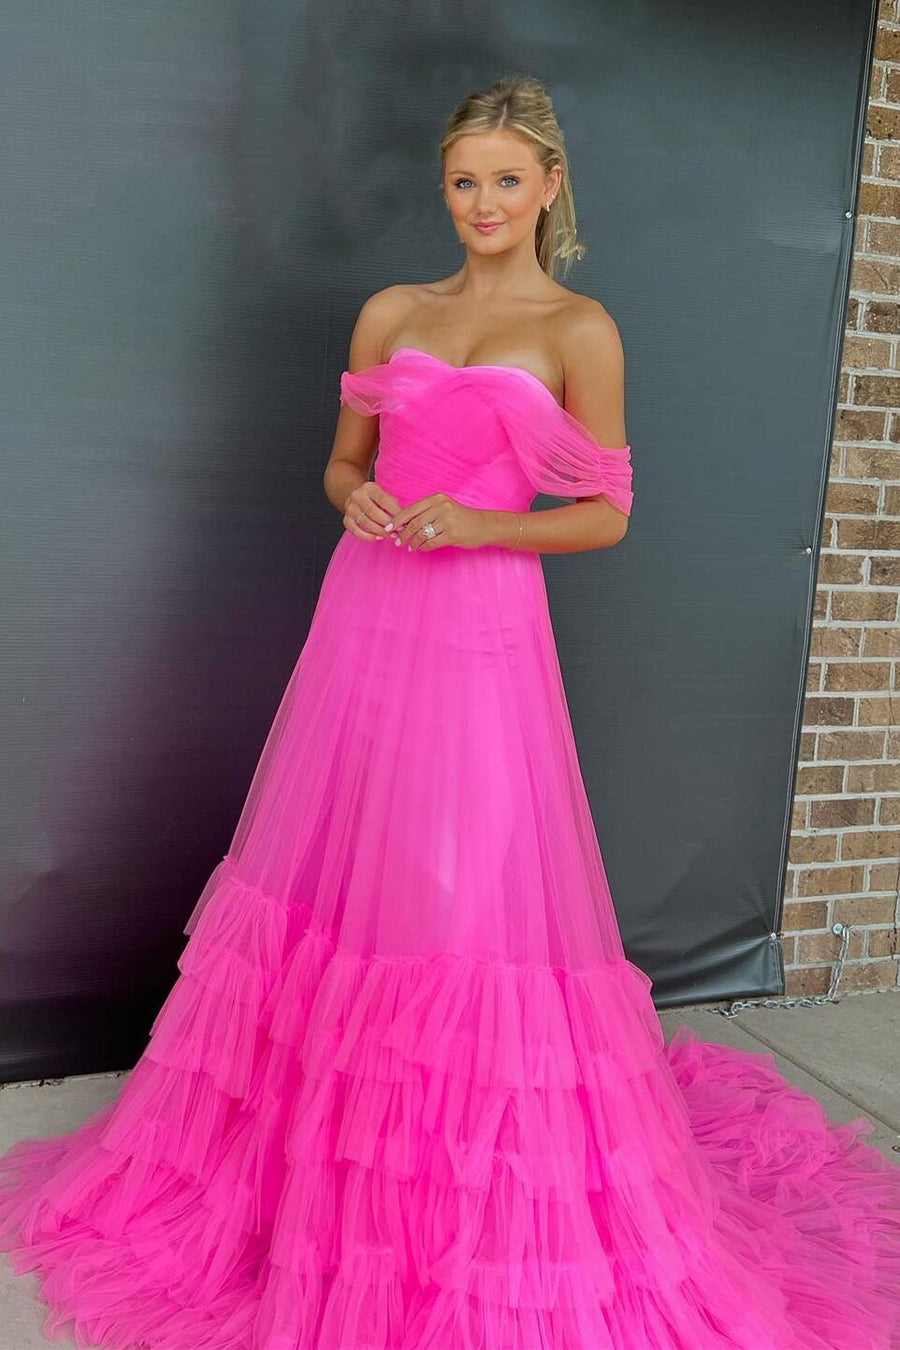 Cross Front Neon Pink Tulle Formal Dress